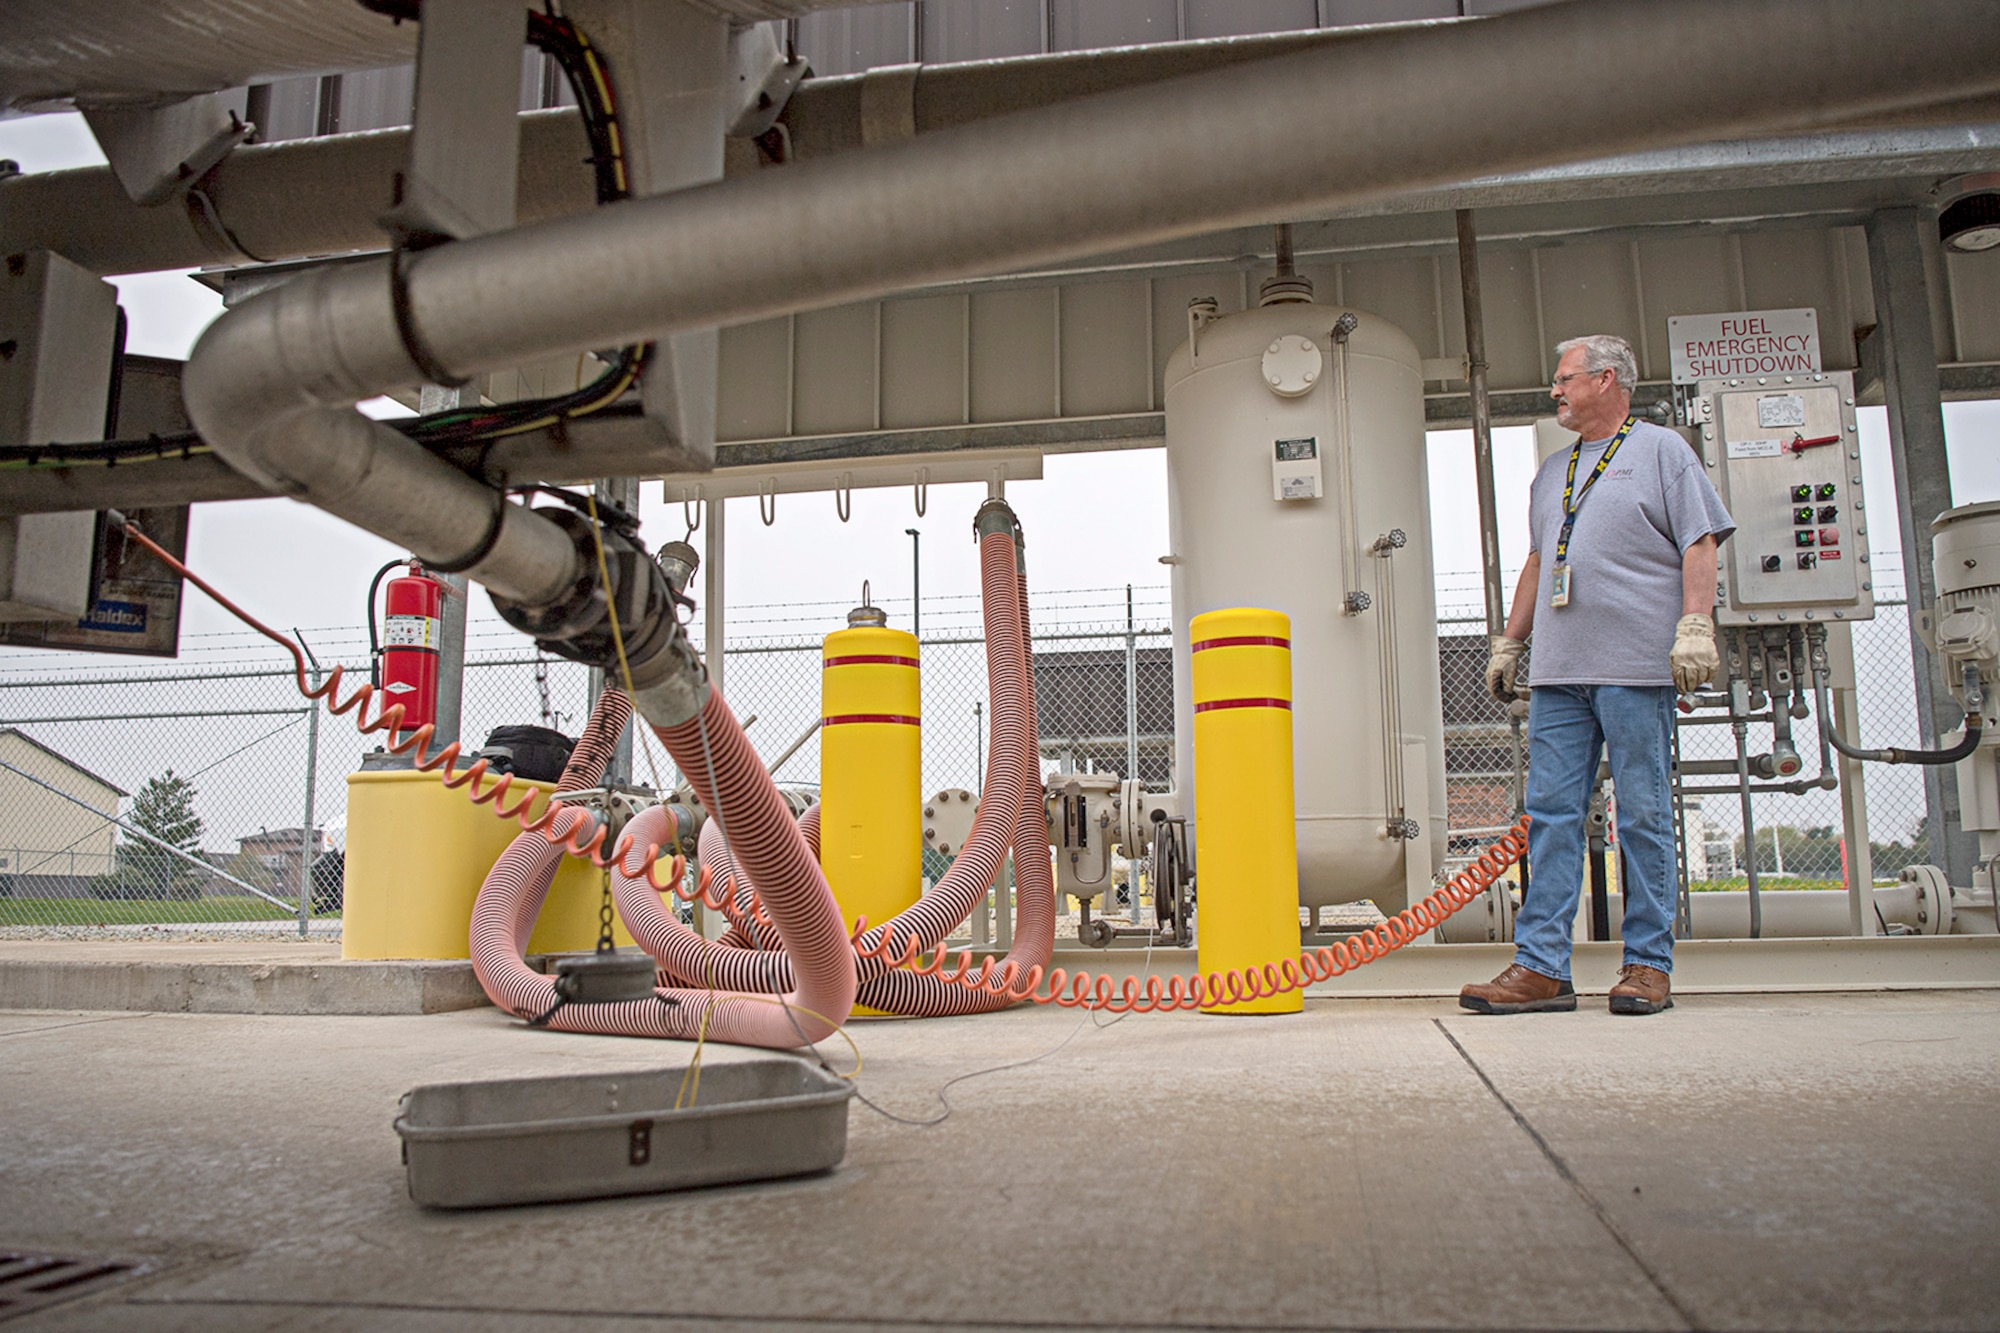 Fueling the fight got a little easier recently as Grissom brought a new $35-million fuel hydrant system on-line.